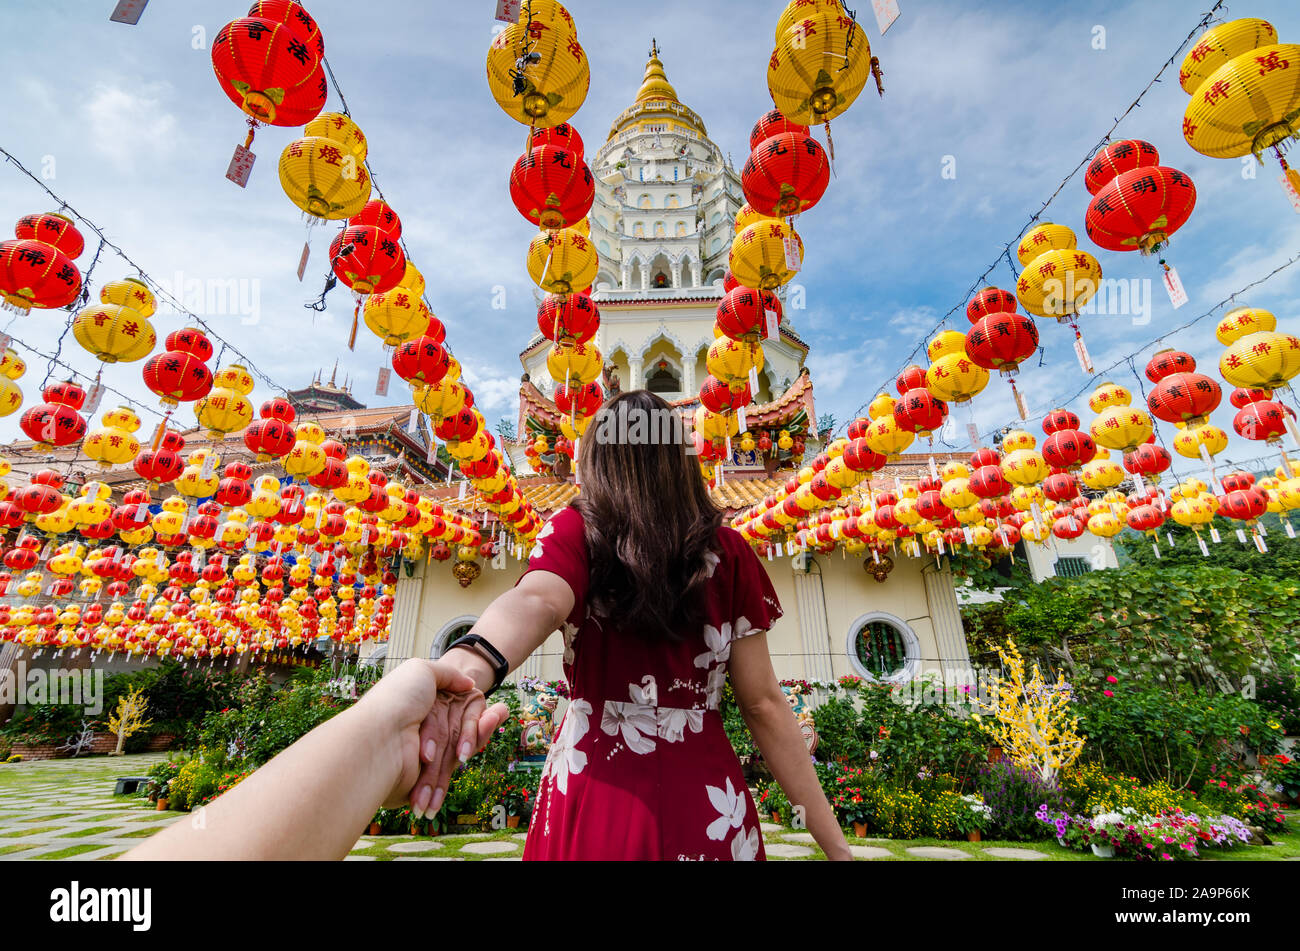 The iconic Kek Lok Si Temple in Penang, Malaysia here will be transformed into a fairyland of lantern for 33 nights during the Lunar New Year season. Stock Photo